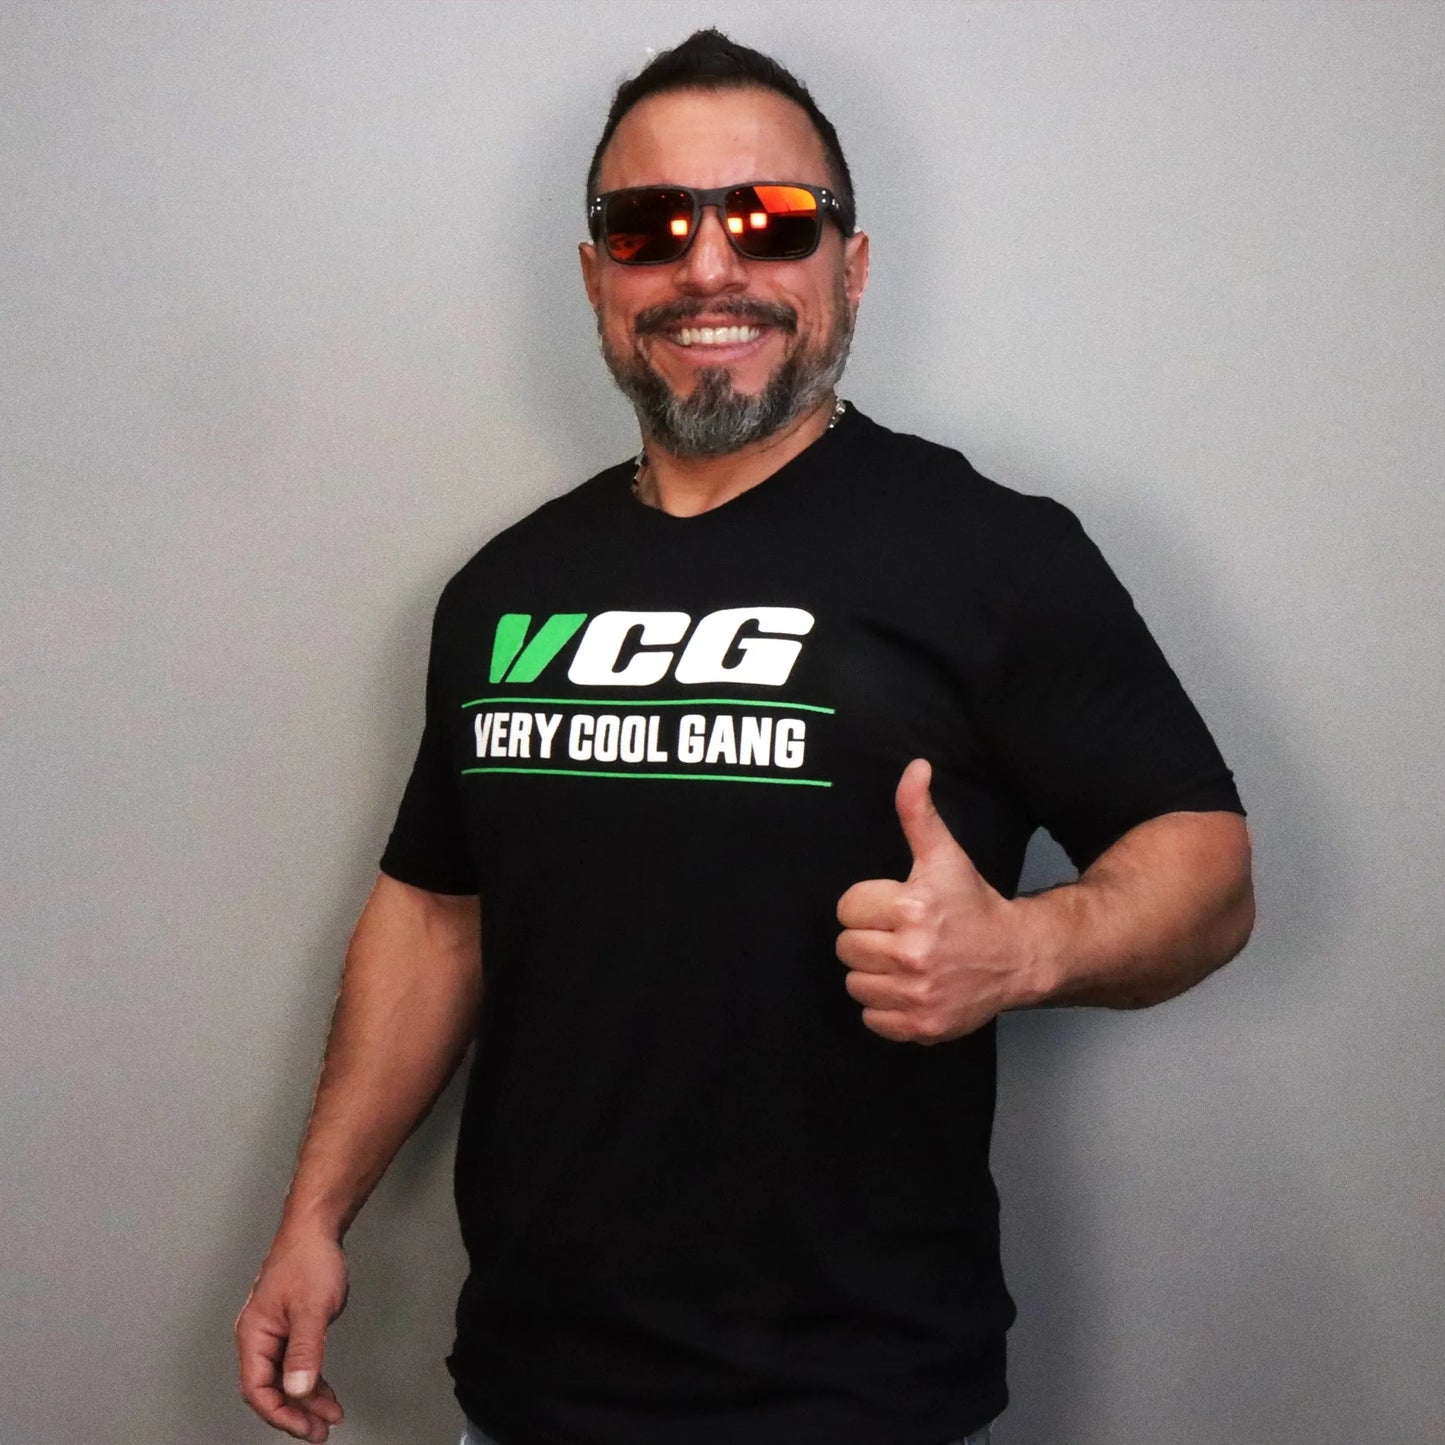 Indulge in comfort with our soft black T-shirt featuring the eye-catching VCG Very Cool Gang Big Ego Logo. The vivid green and white screen print adds a burst of color, making a bold statement and ensuring you stand out in style